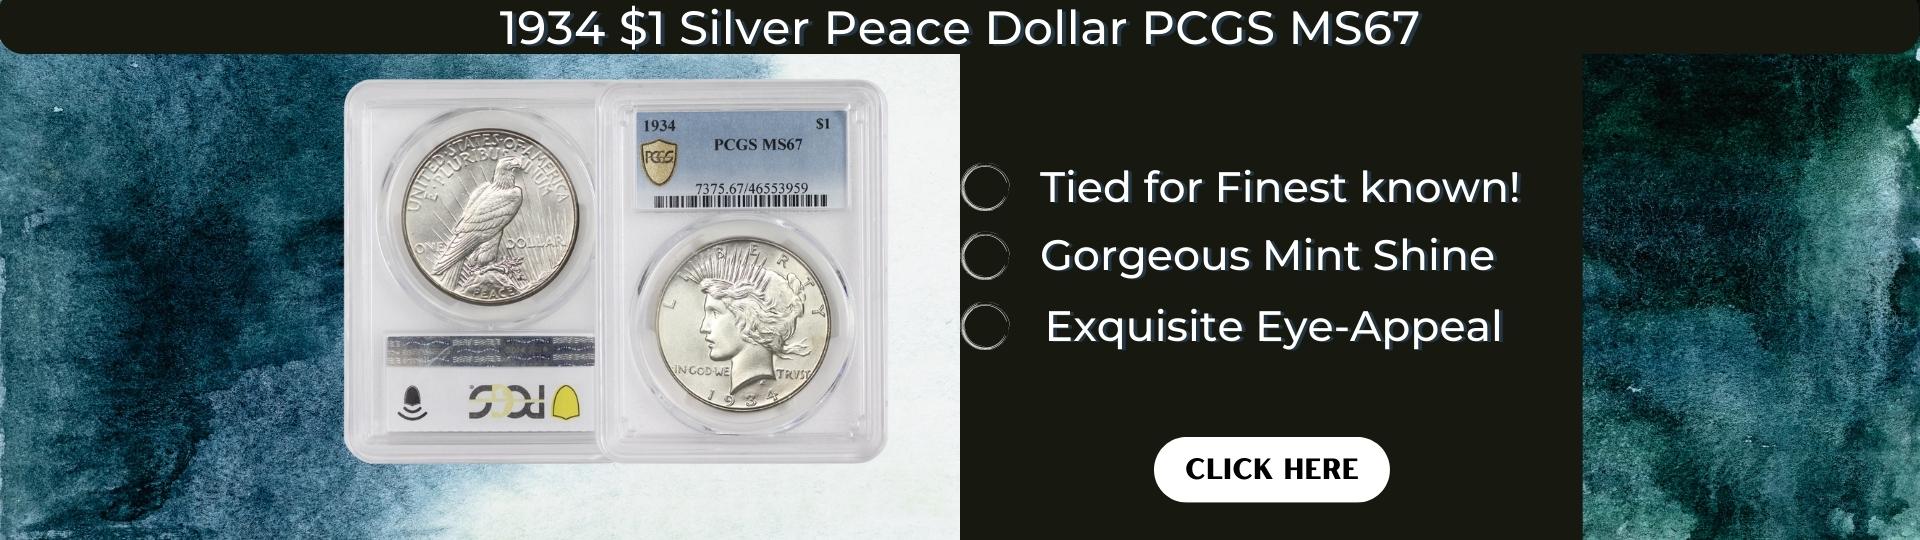 1934 silver peace dollar coin graded M S sixty seven by P C G S